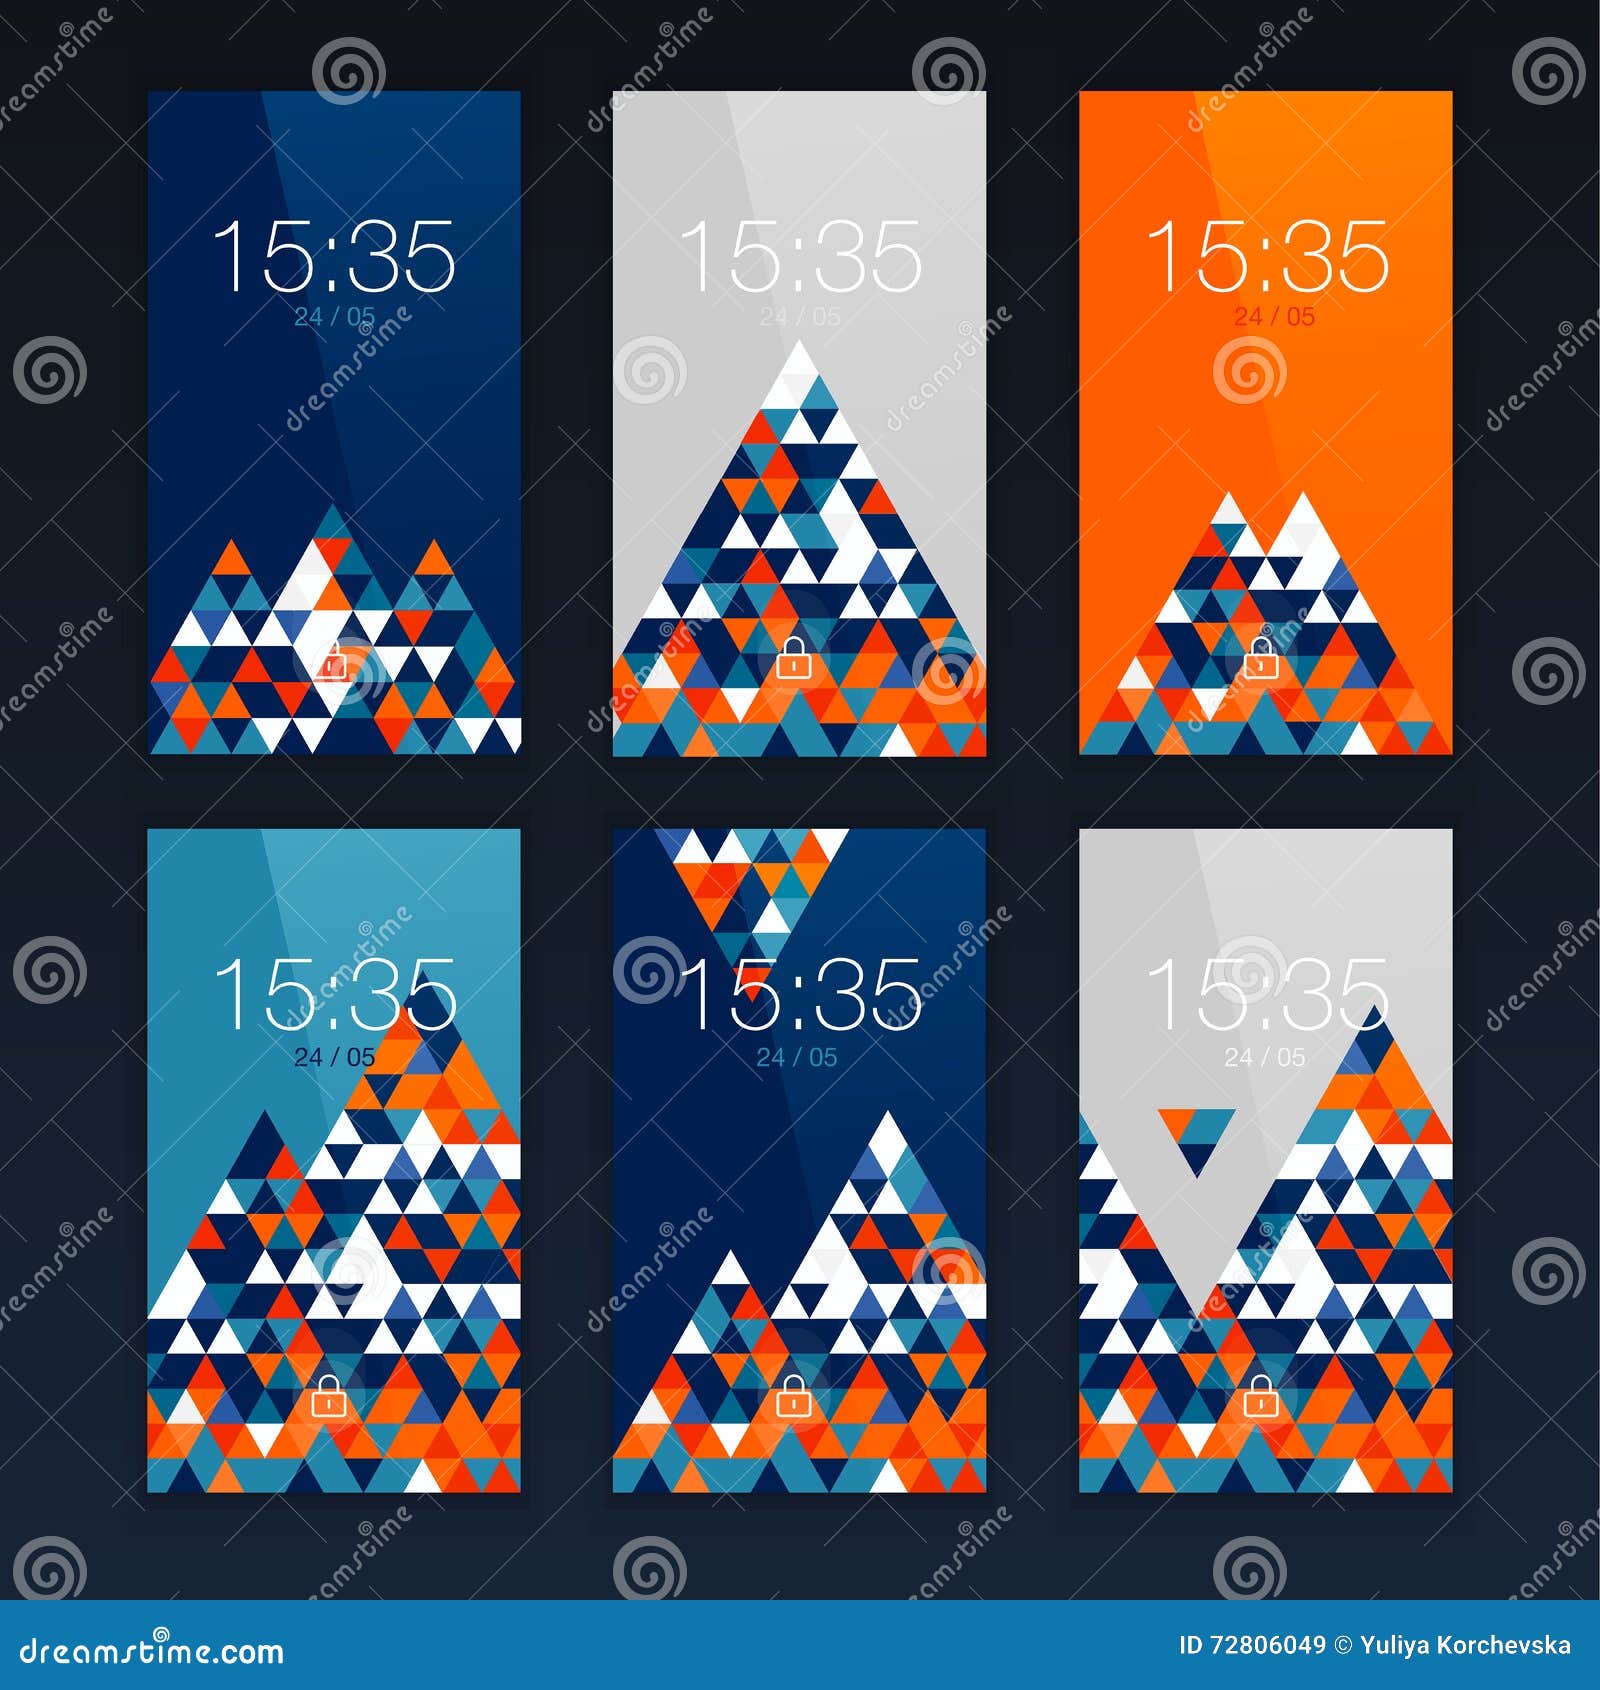 Mobile Interface Wallpaper Design Set With Abstract Vector Stock Images, Photos, Reviews